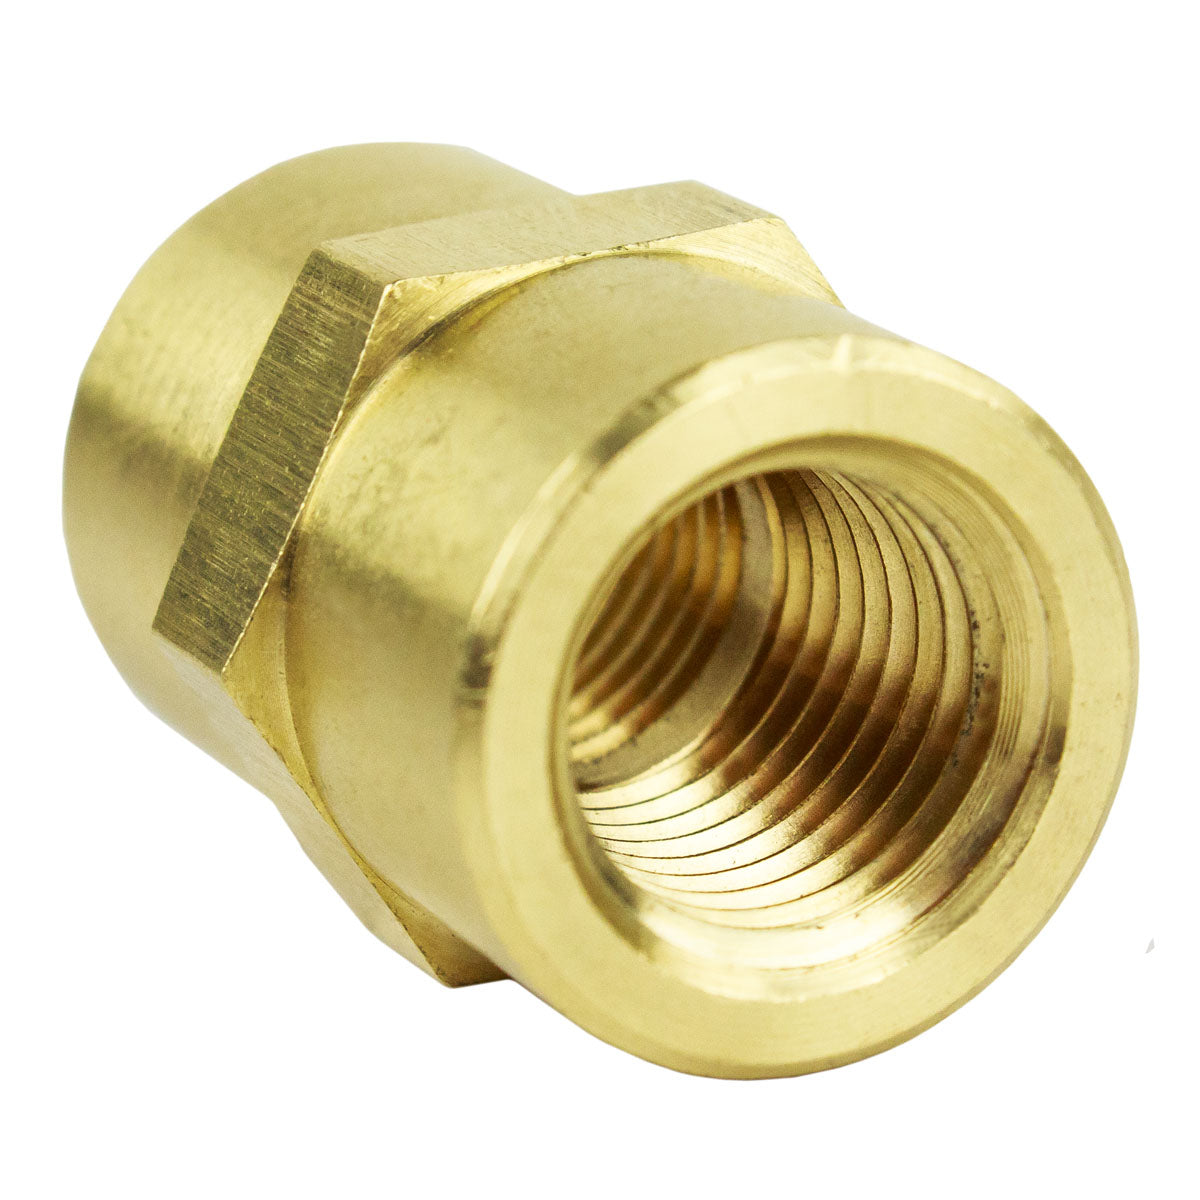 Ten 1/4" NPT Female Solid Brass Pipe Unions Adapter Fitting WOG Solid Connector